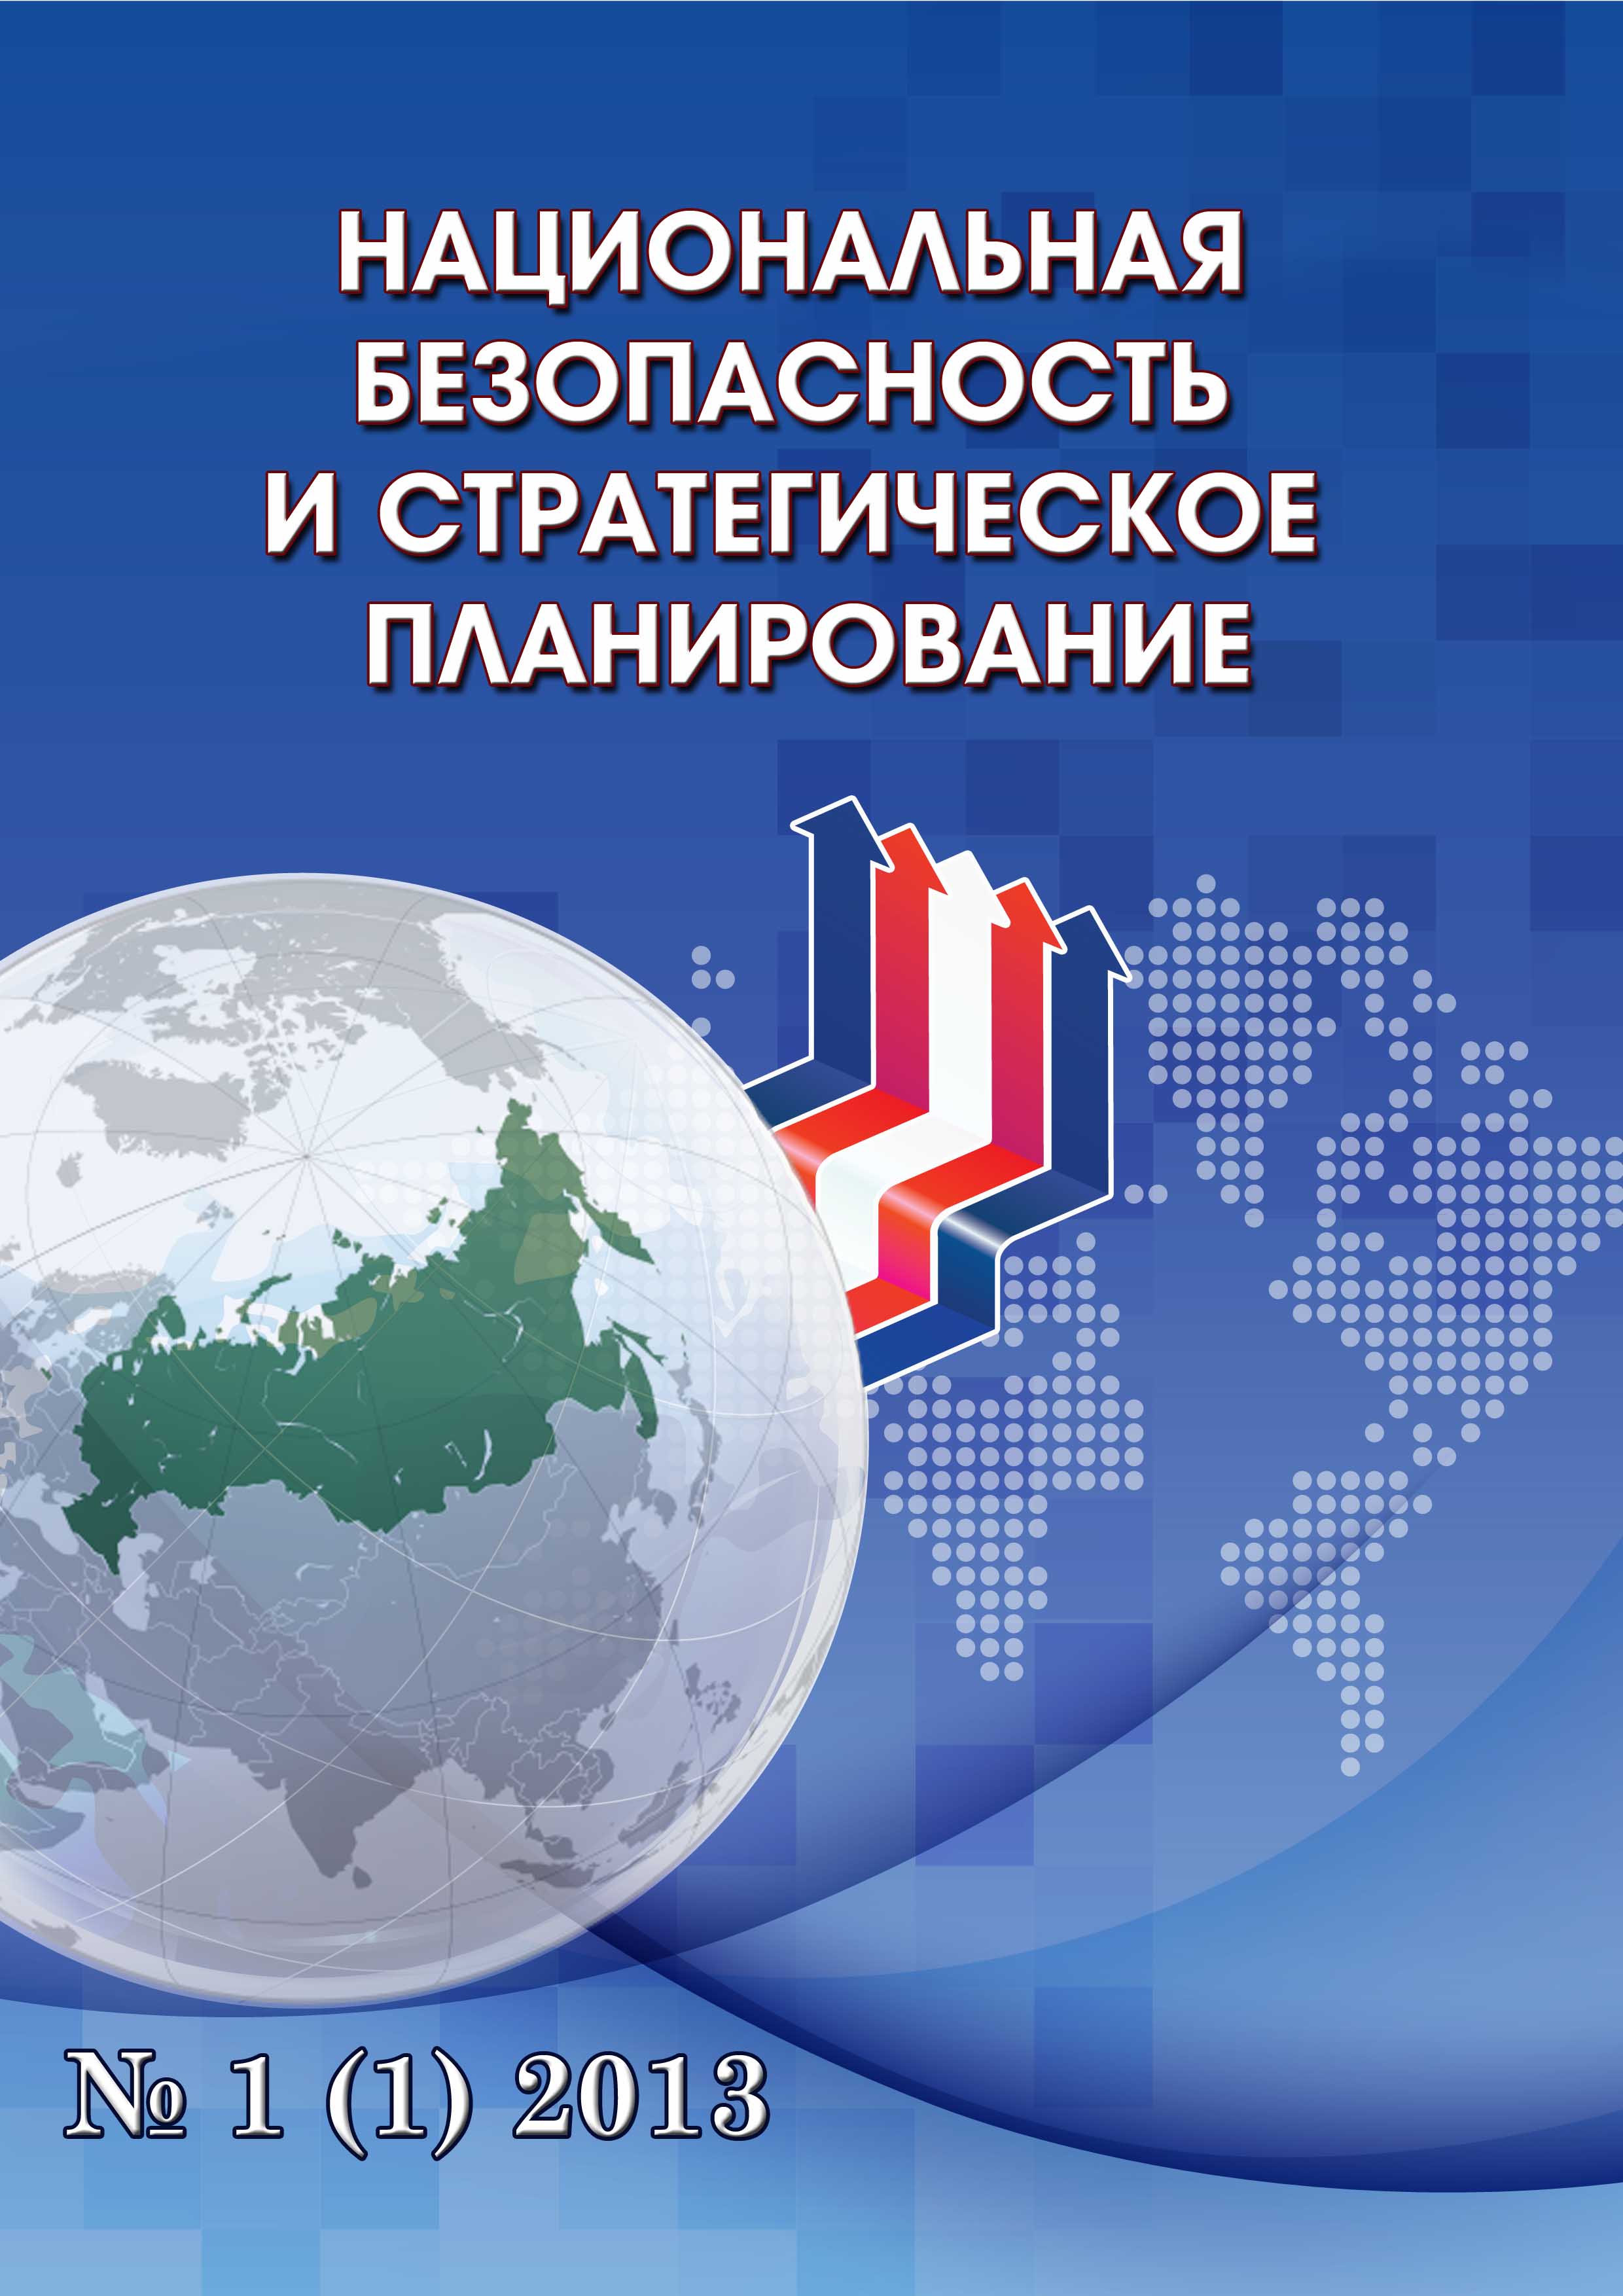                         Security of information support in the economic security system
            